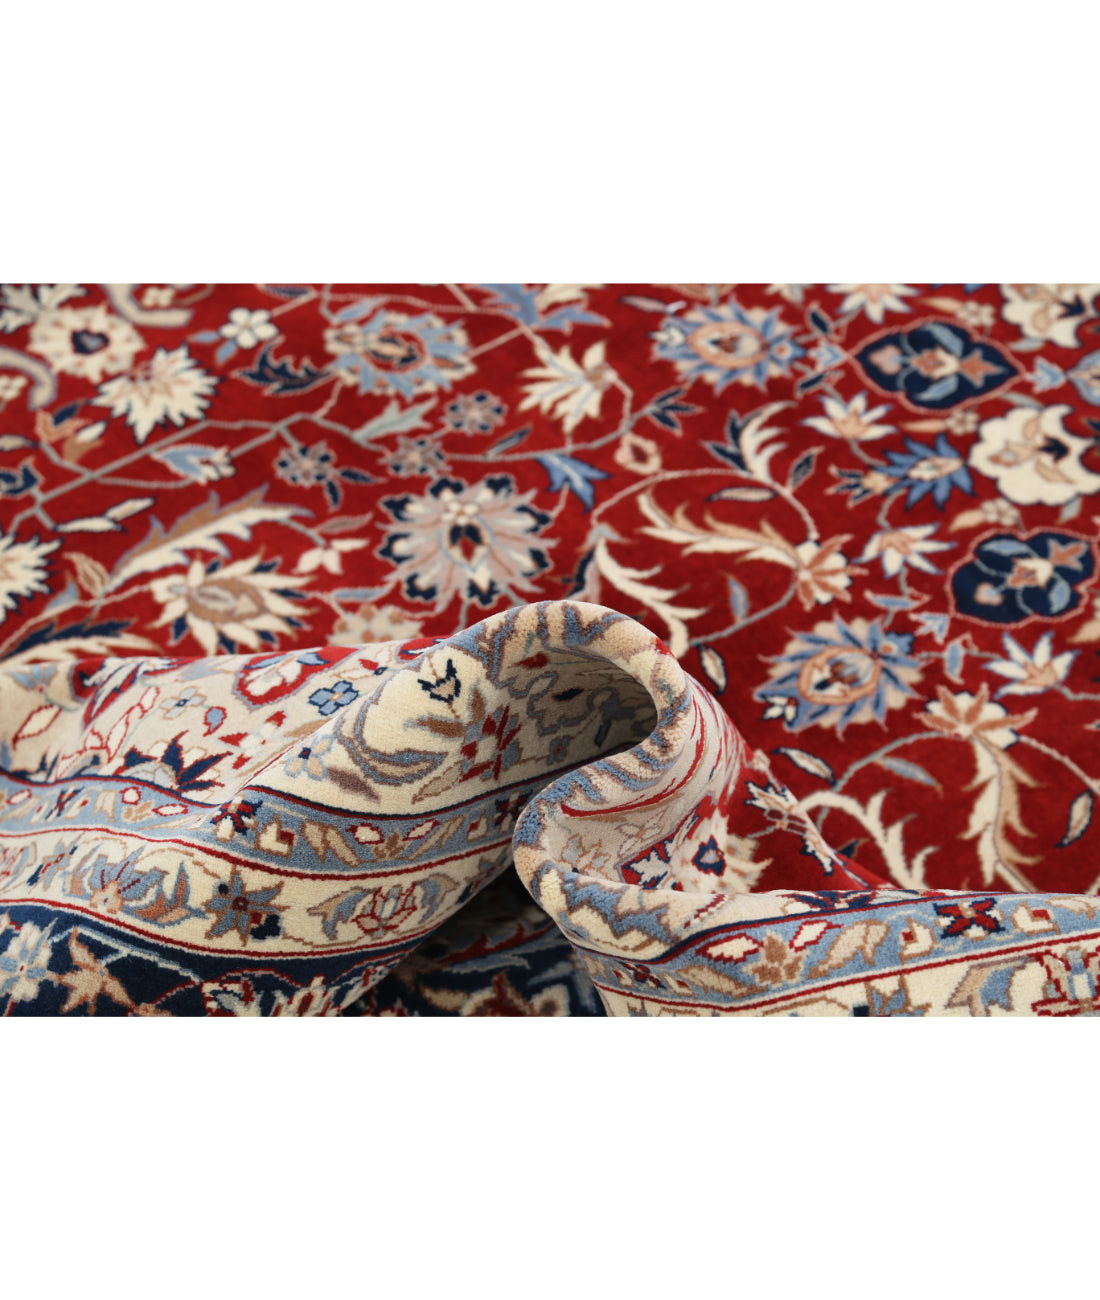 Heritage 6' 6" X 9' 10" Hand-Knotted Wool Rug 6' 6" X 9' 10" (198 X 300) / Red / Blue